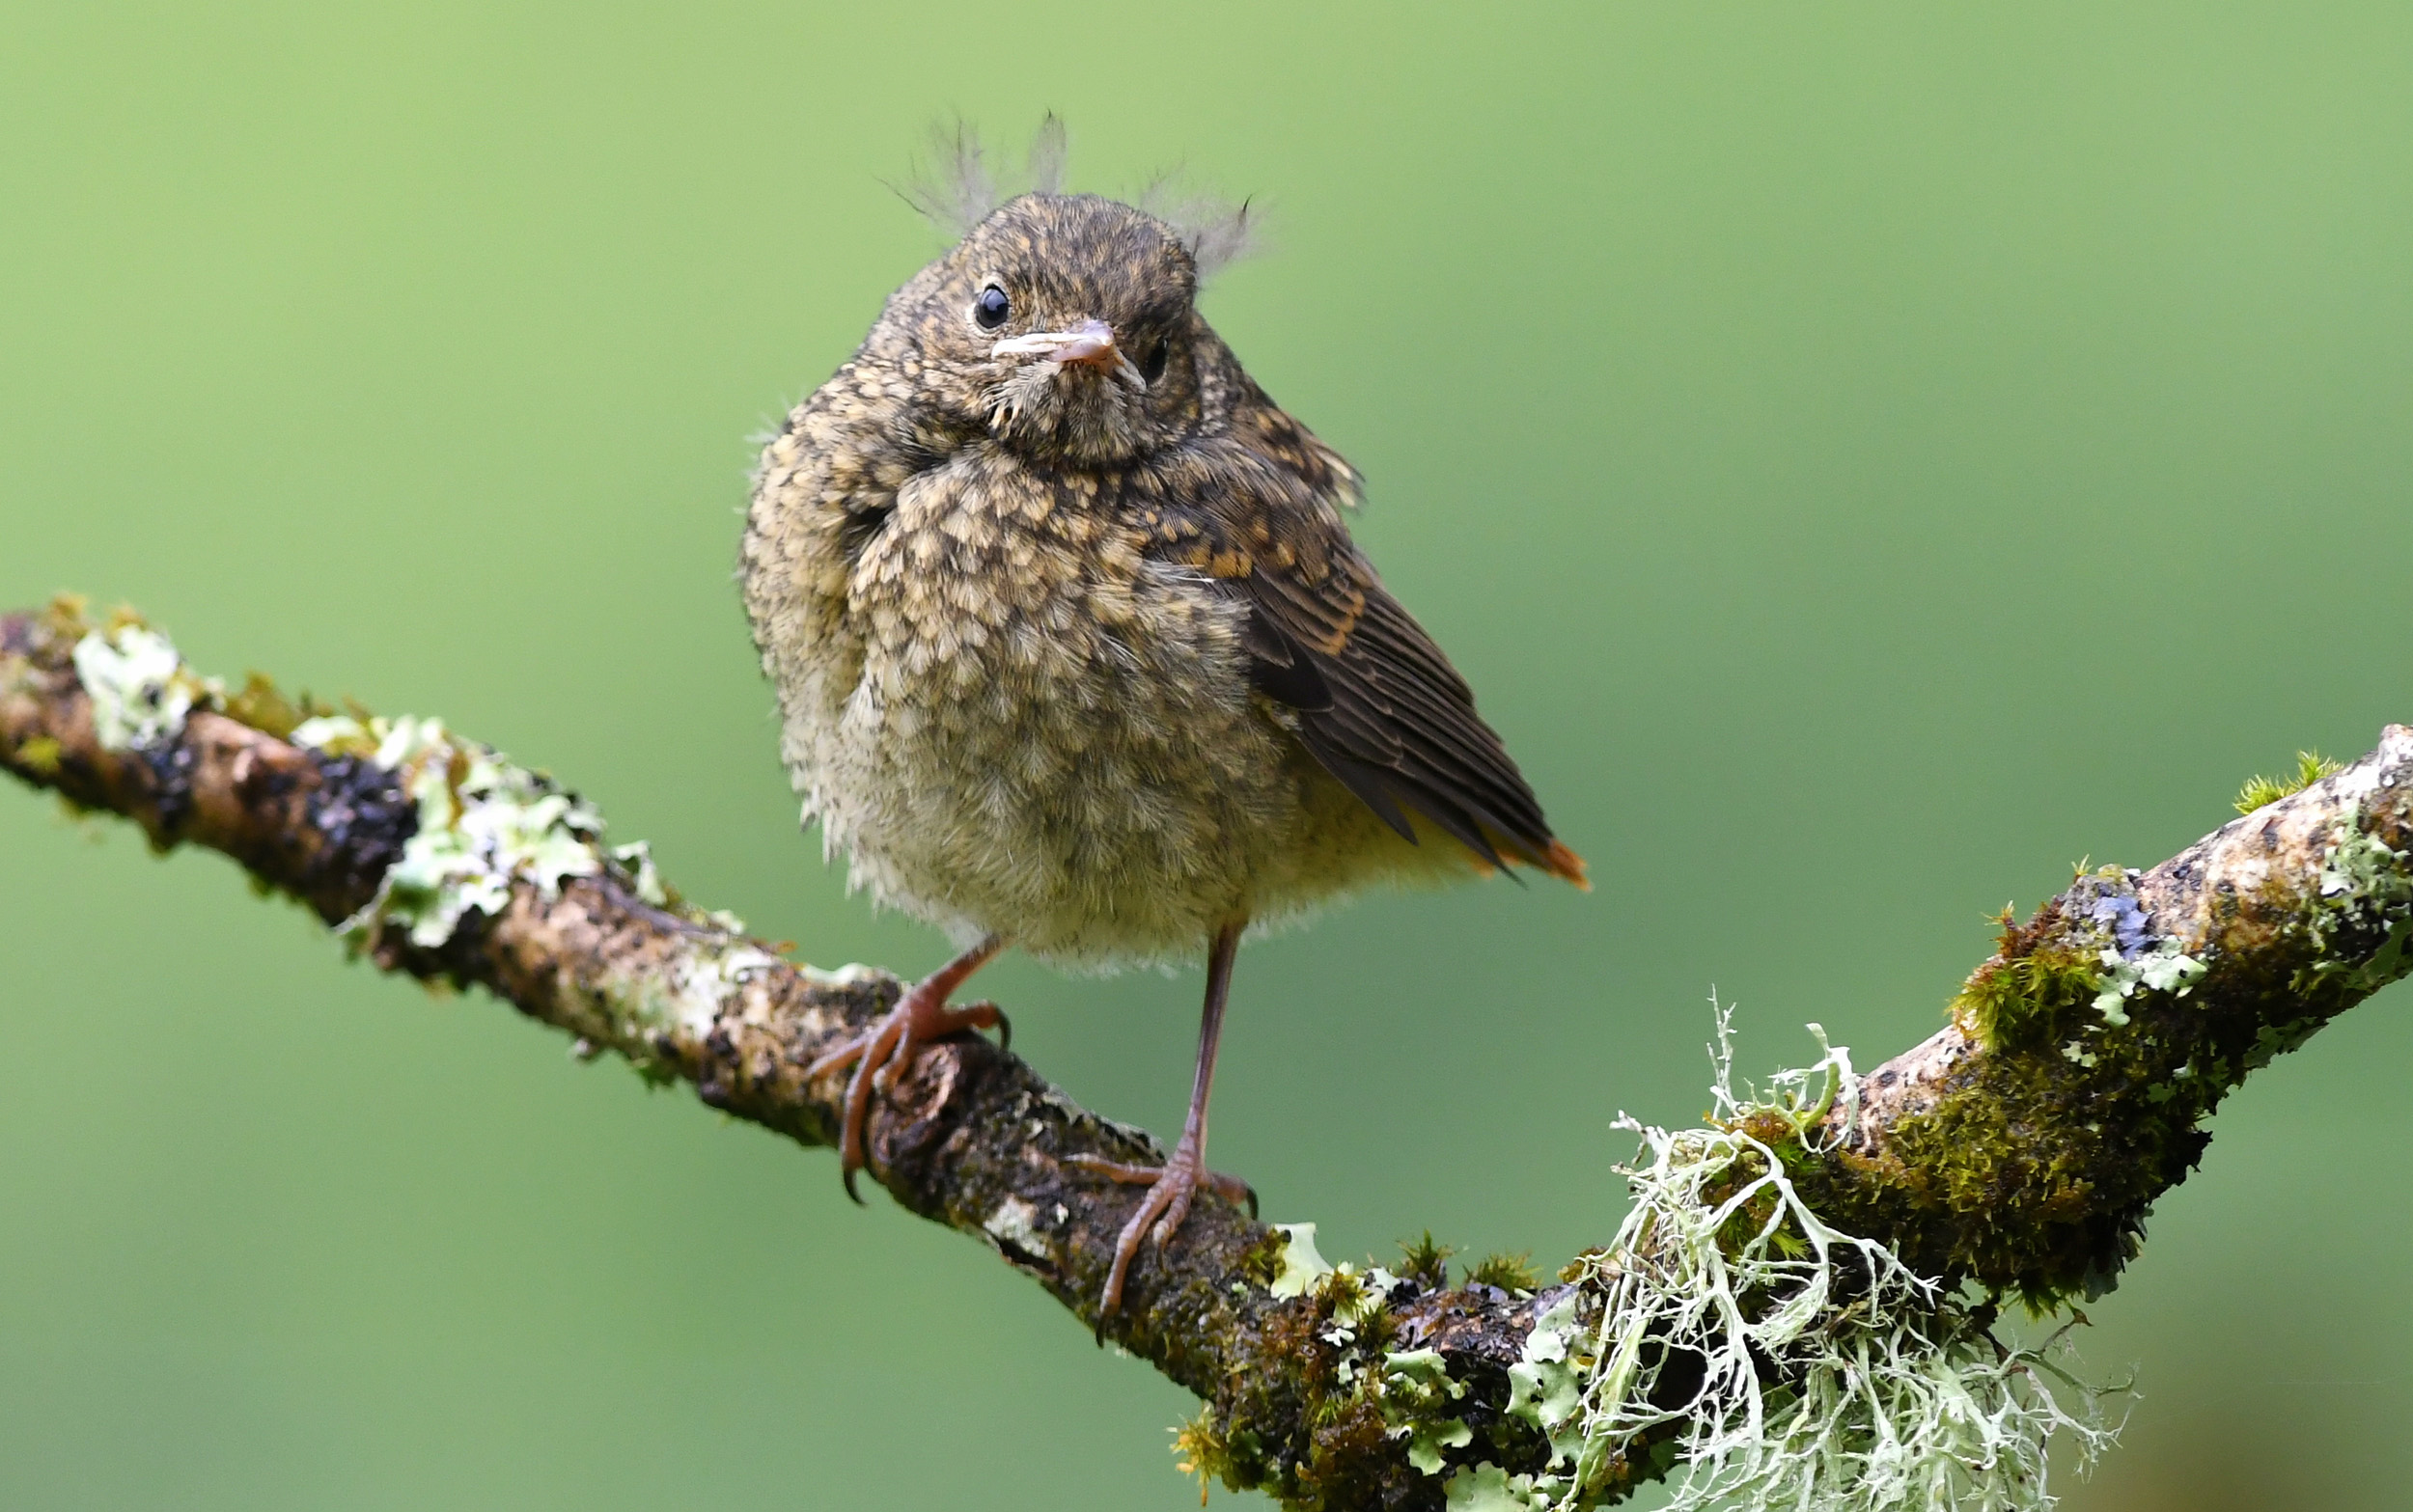 A juvenile Robin perched on a branch.